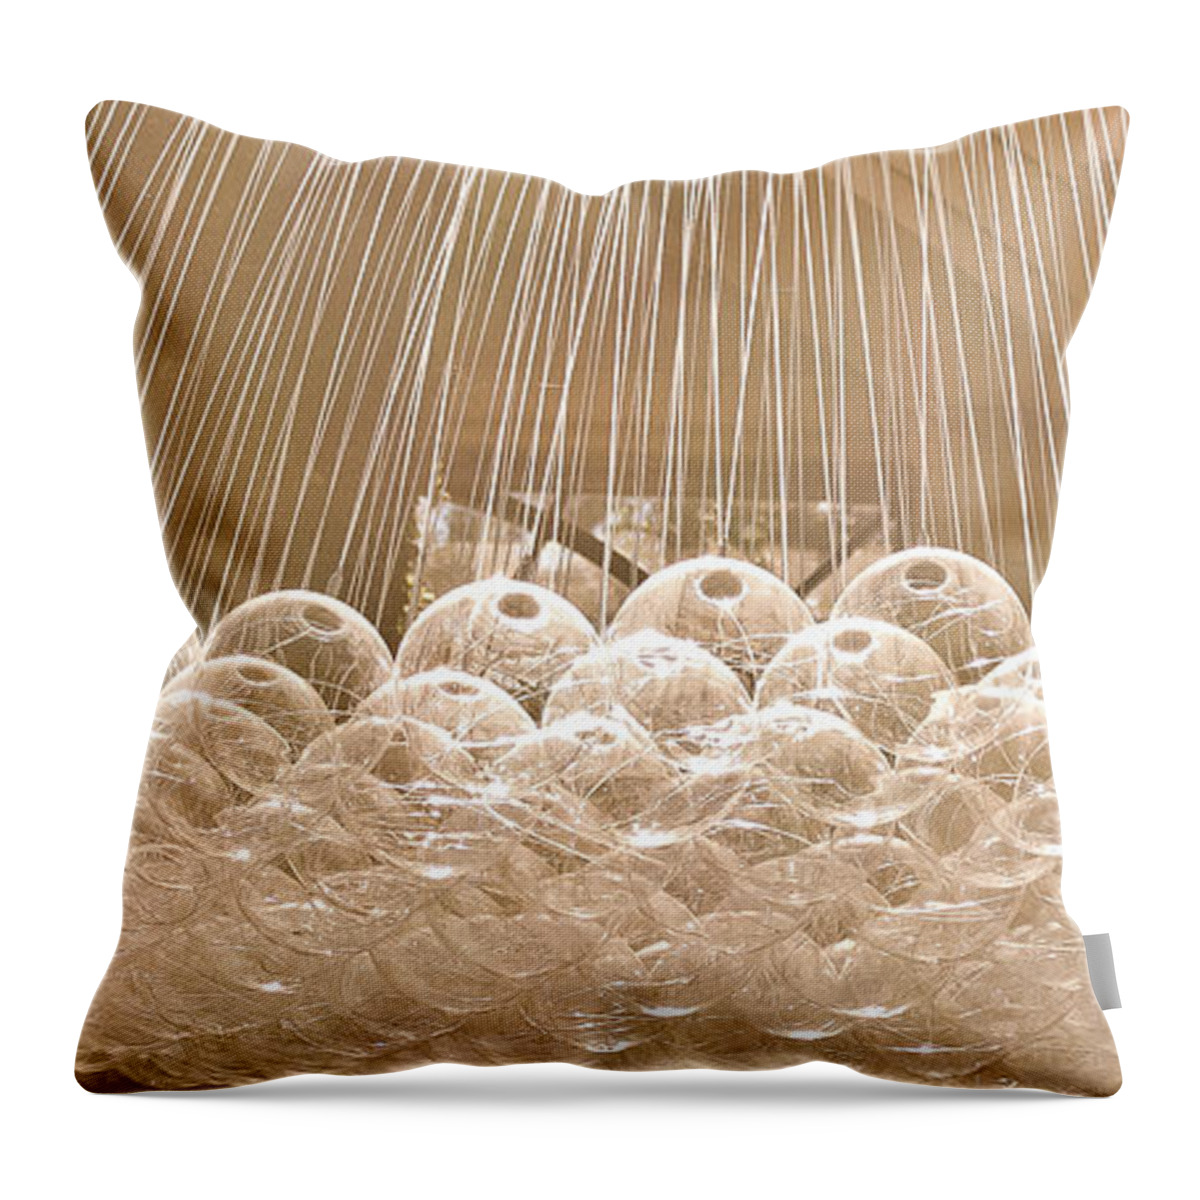 Longwood Gardens Throw Pillow featuring the photograph Glass Bubbles by Trish Tritz